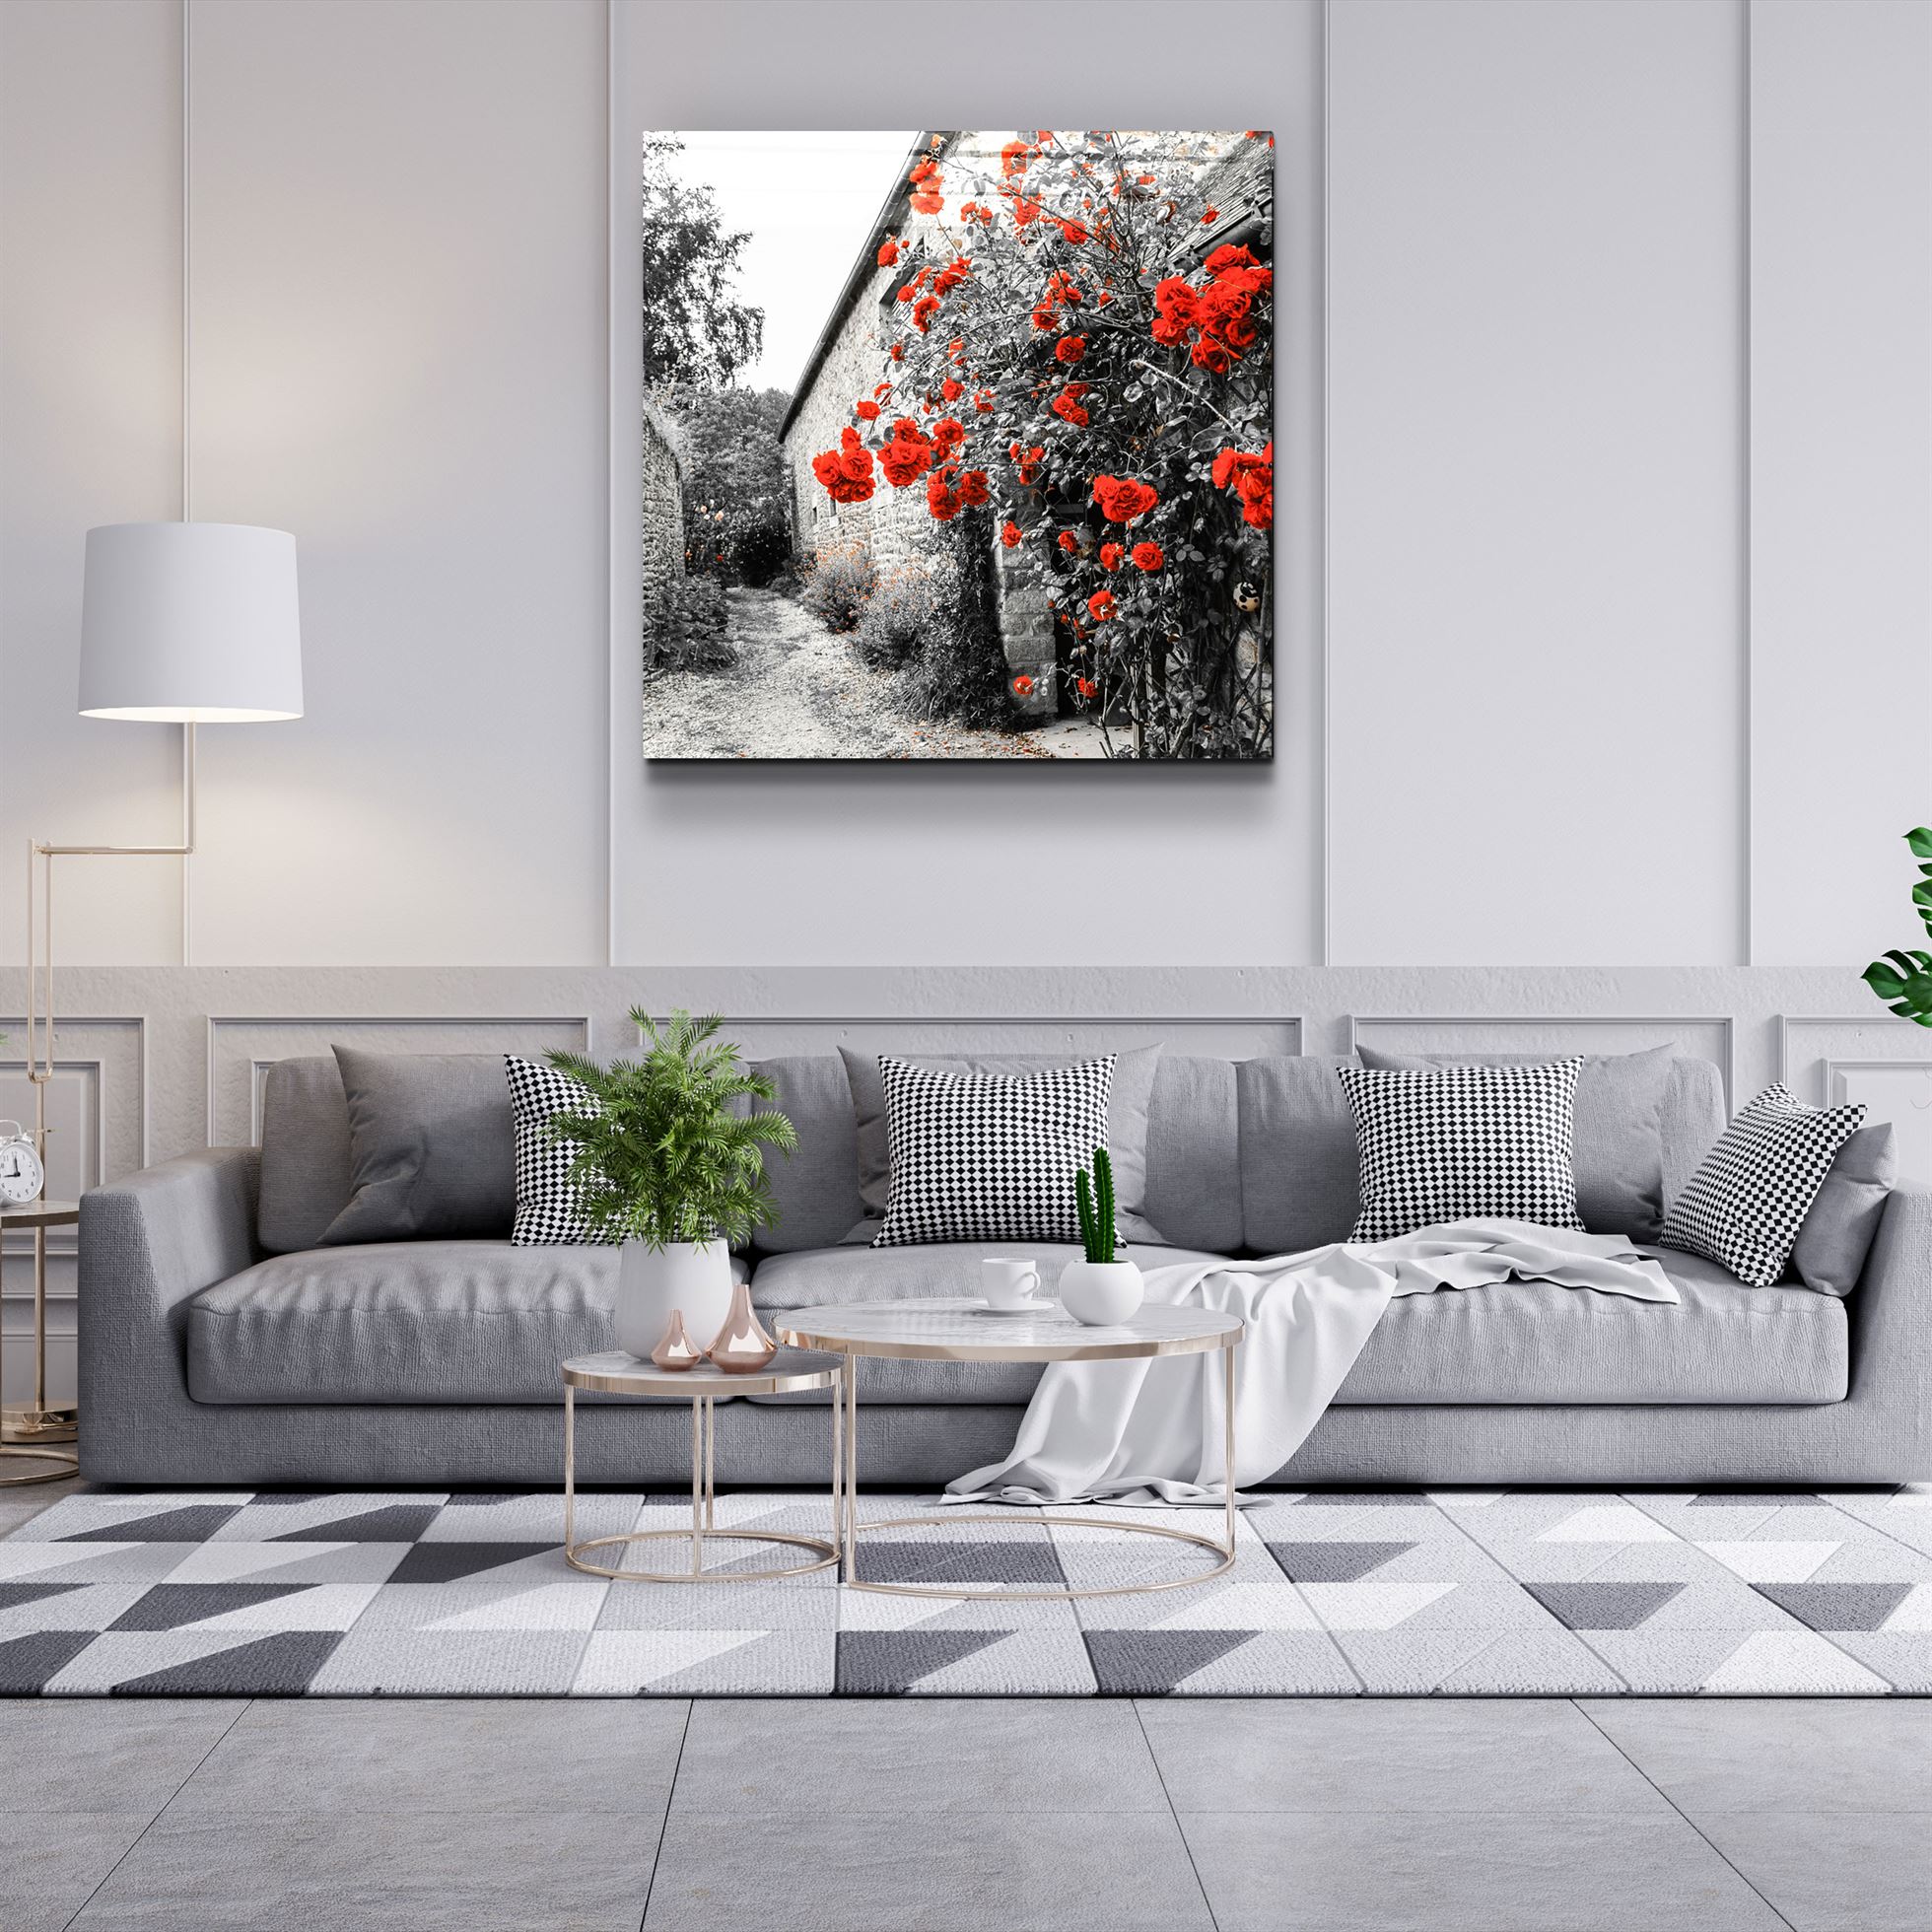 ・"Red Roses"・Glass Wall Art